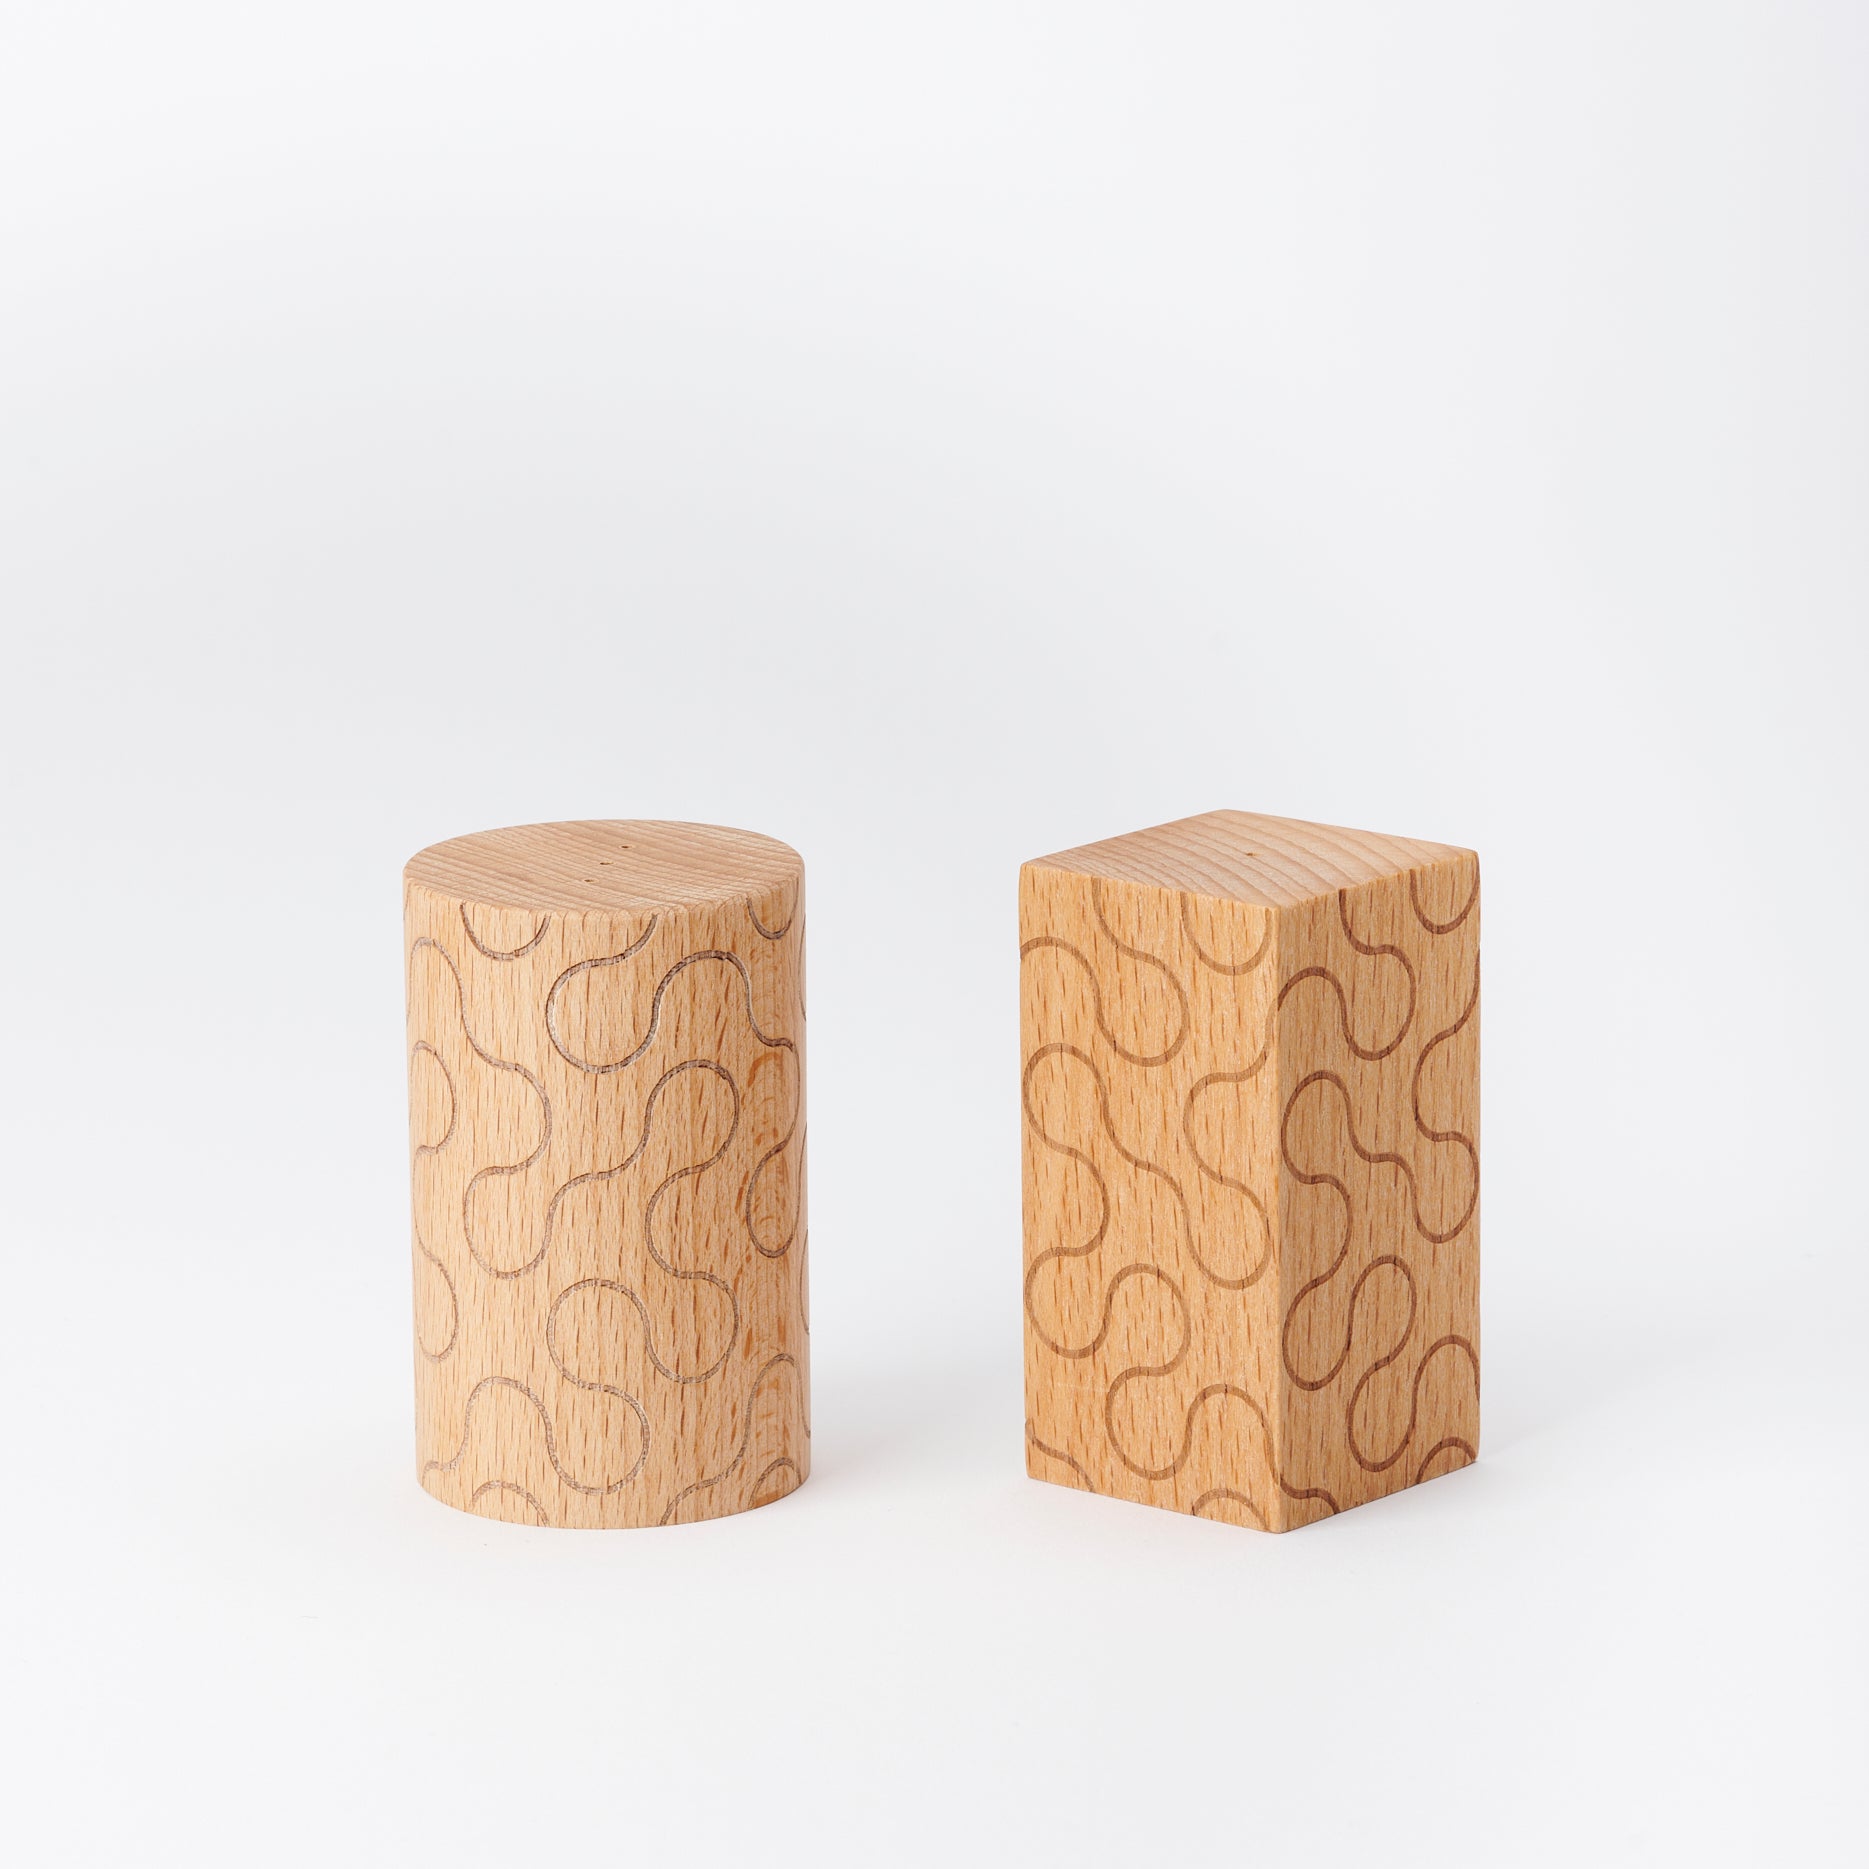 pair of wooden Areaware salt and pepper shakers for the table